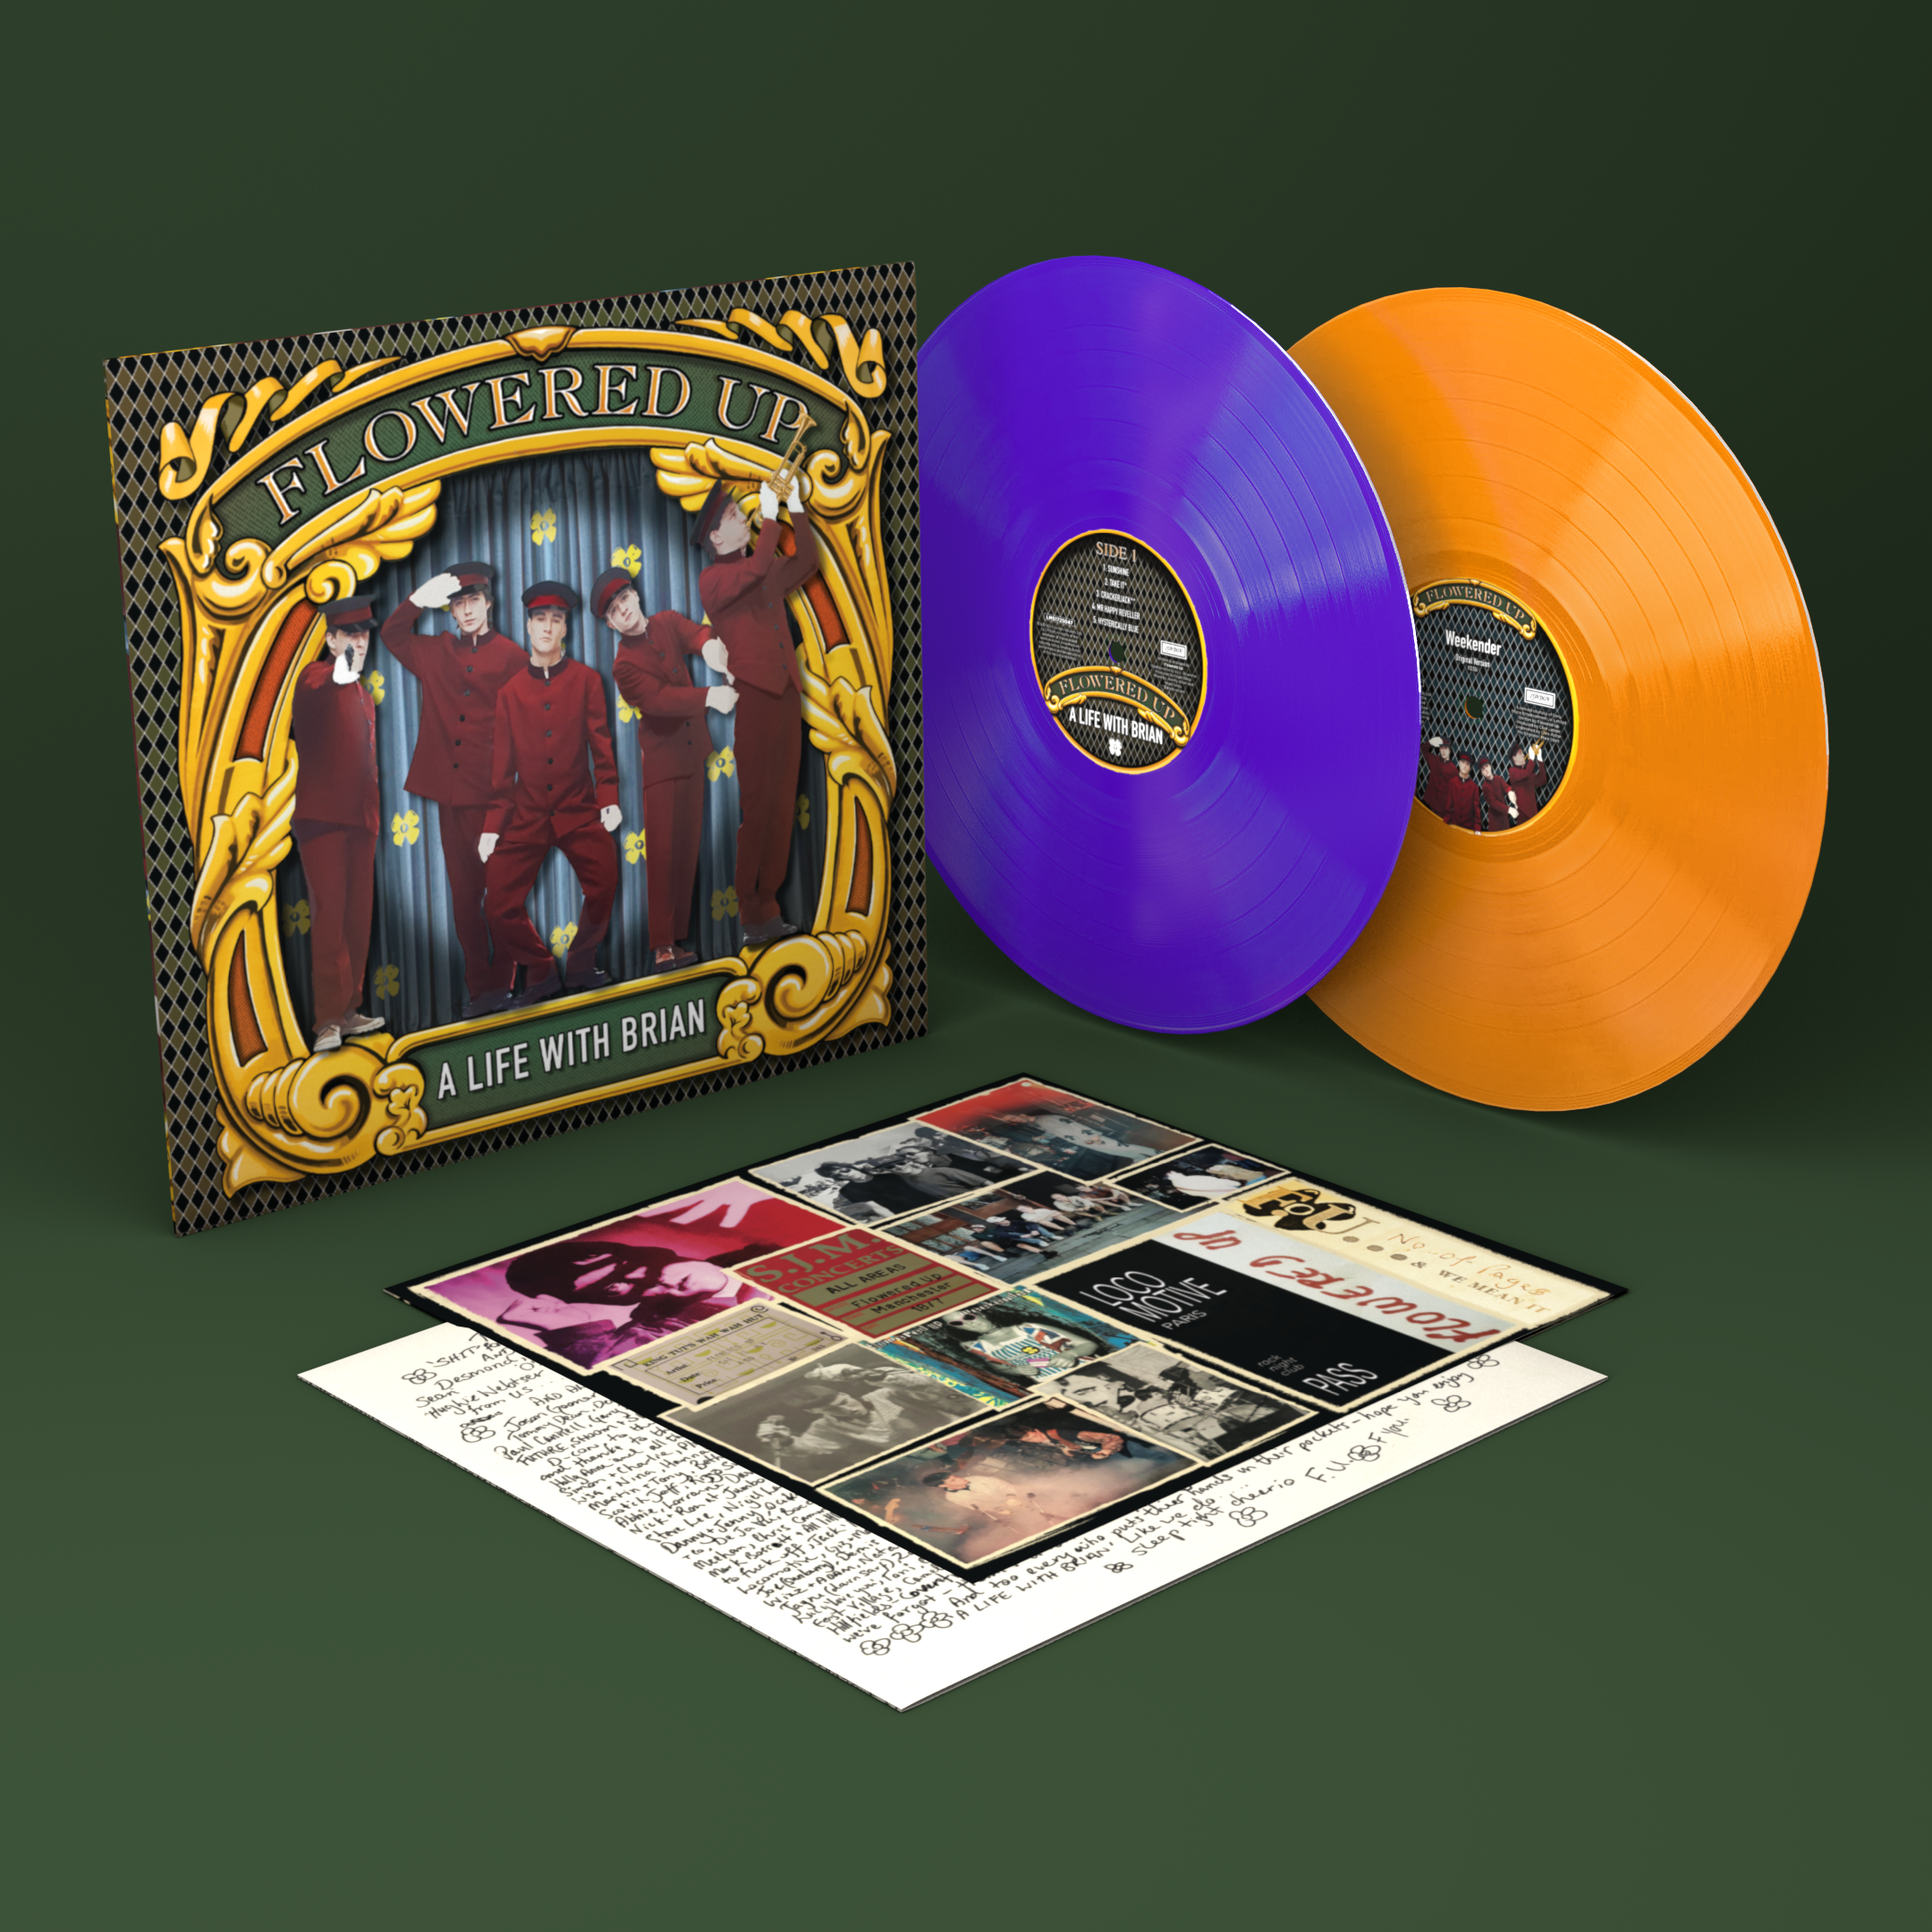 Flowered Up - A Life With Brian: Limited Orange & Purple Vinyl 2LP